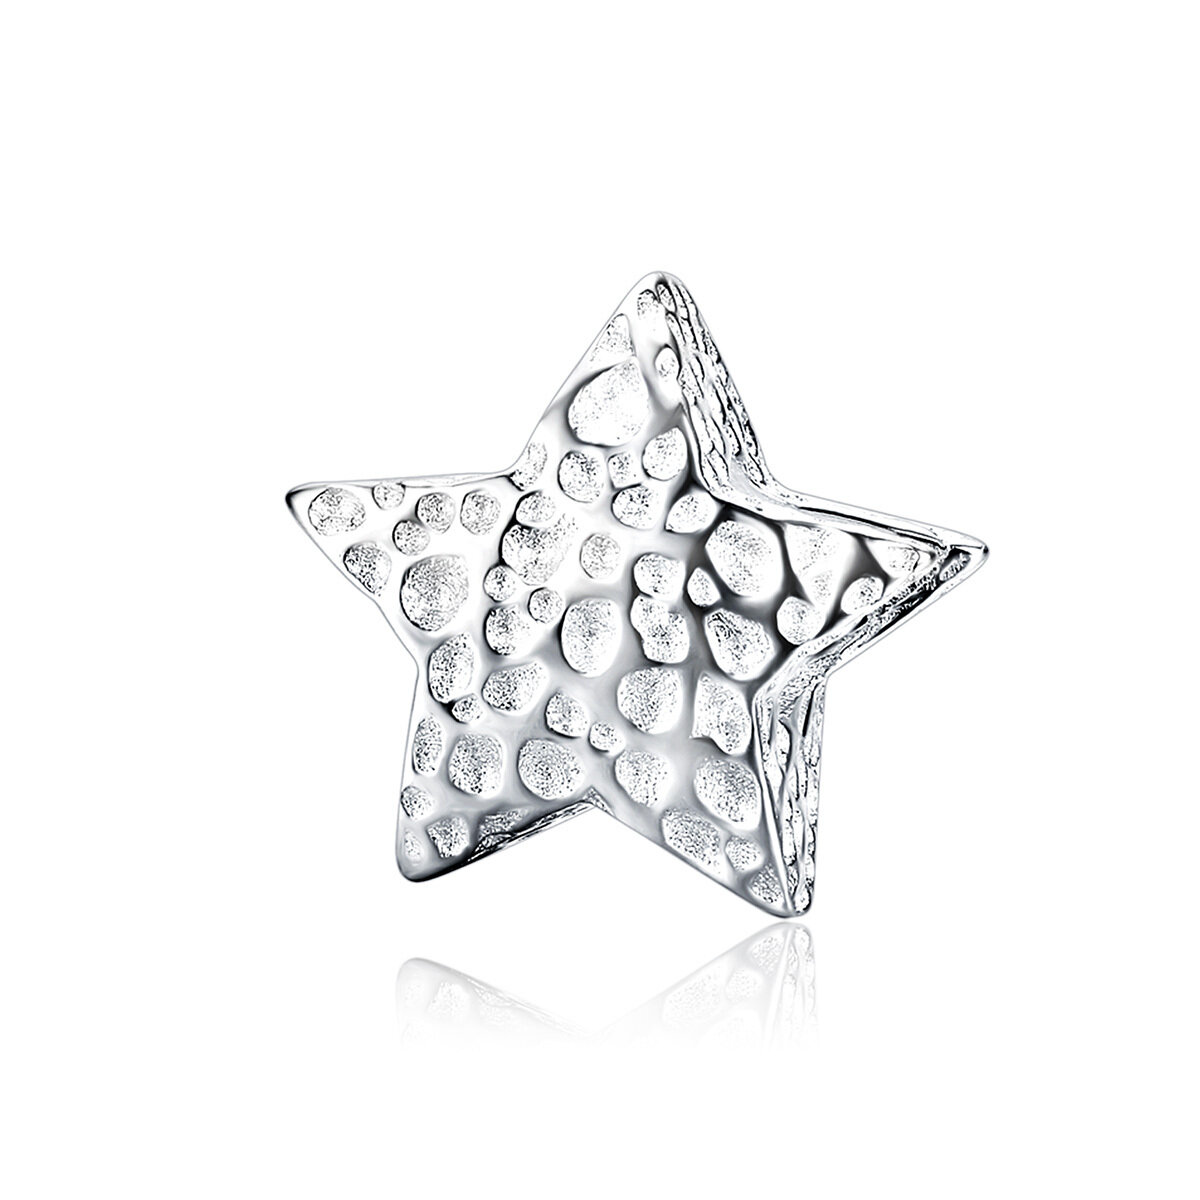 GemKing SCC1246 Starry S925 Sterling Silver Charm